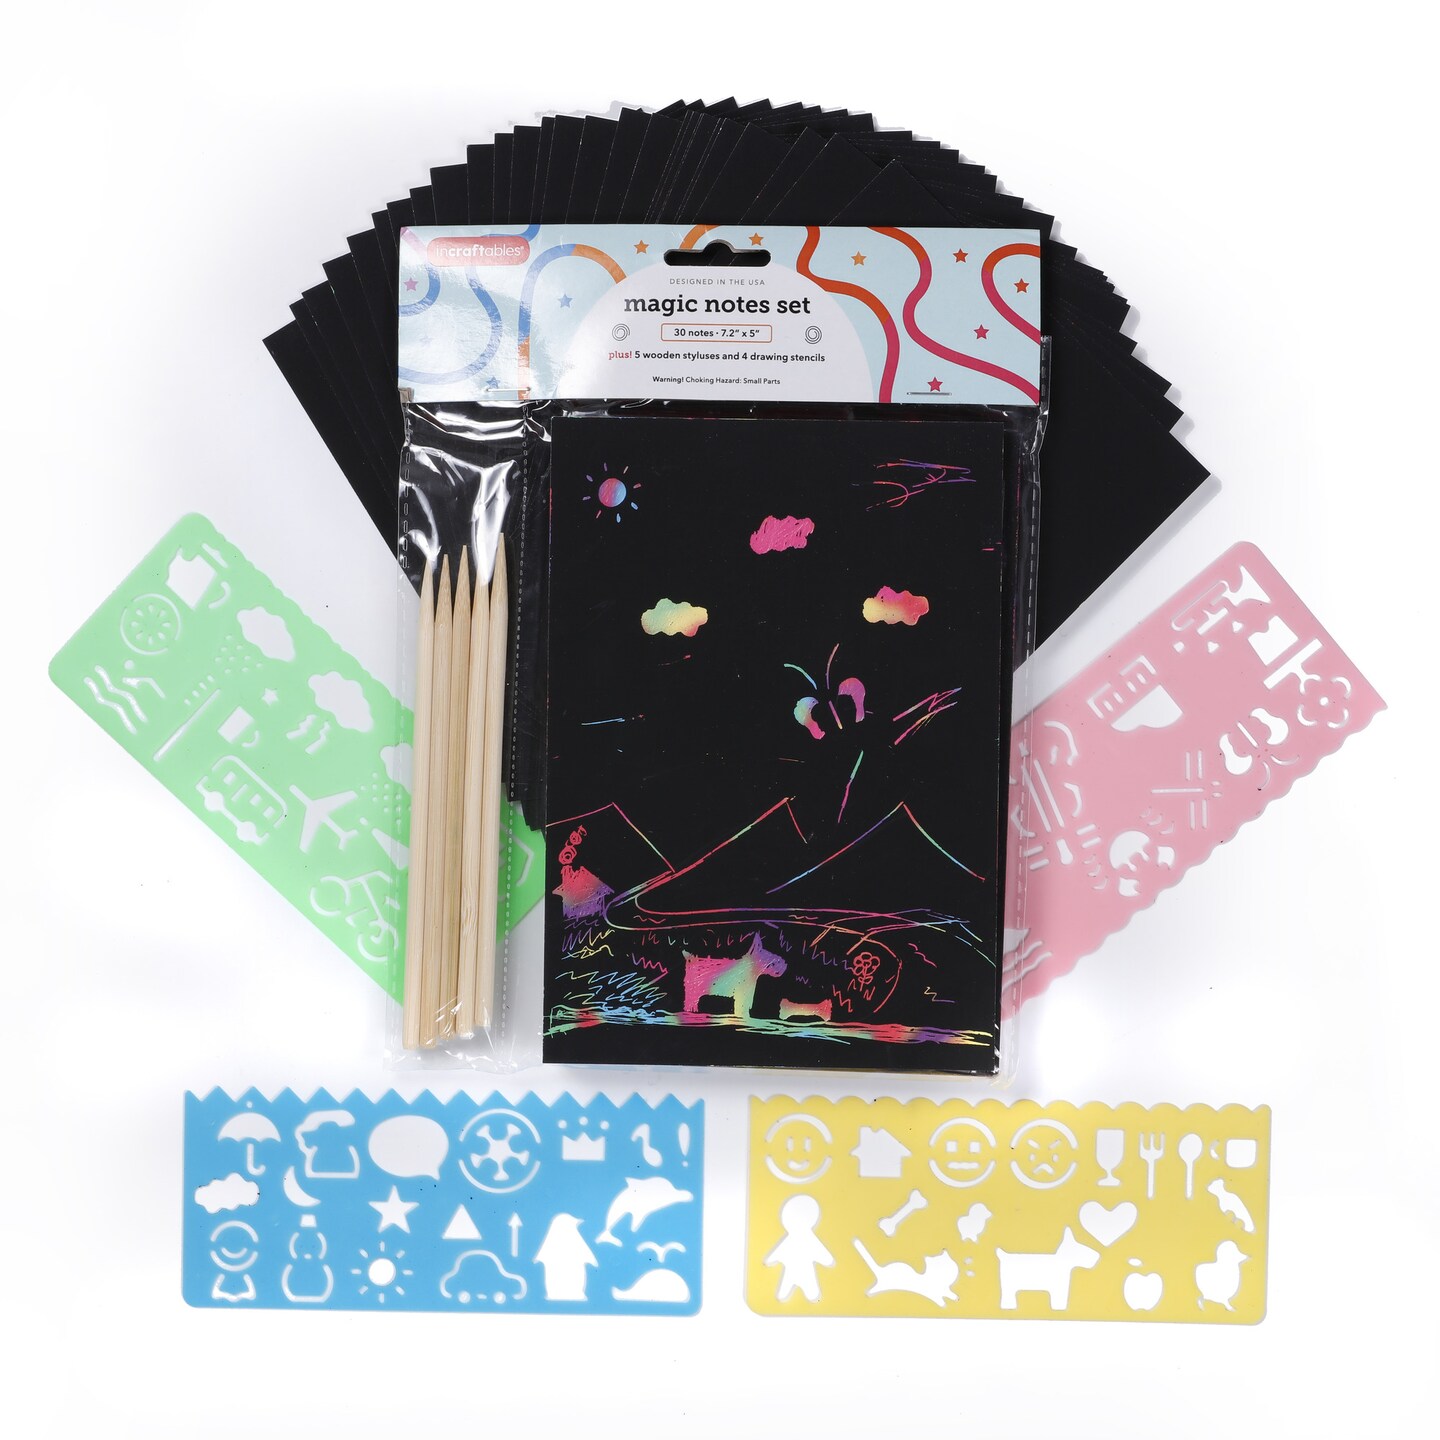 Incraftables Rainbow Scratch Paper Set. Magic Notes Kit with 30pcs Scratch Art Paper, 5pcs Wooden Stylus &#x26; 4pcs Drawing Stencils. Black Scratch Off Paper for Kids. Best Scratch Pad for Drawing &#x26; Craft